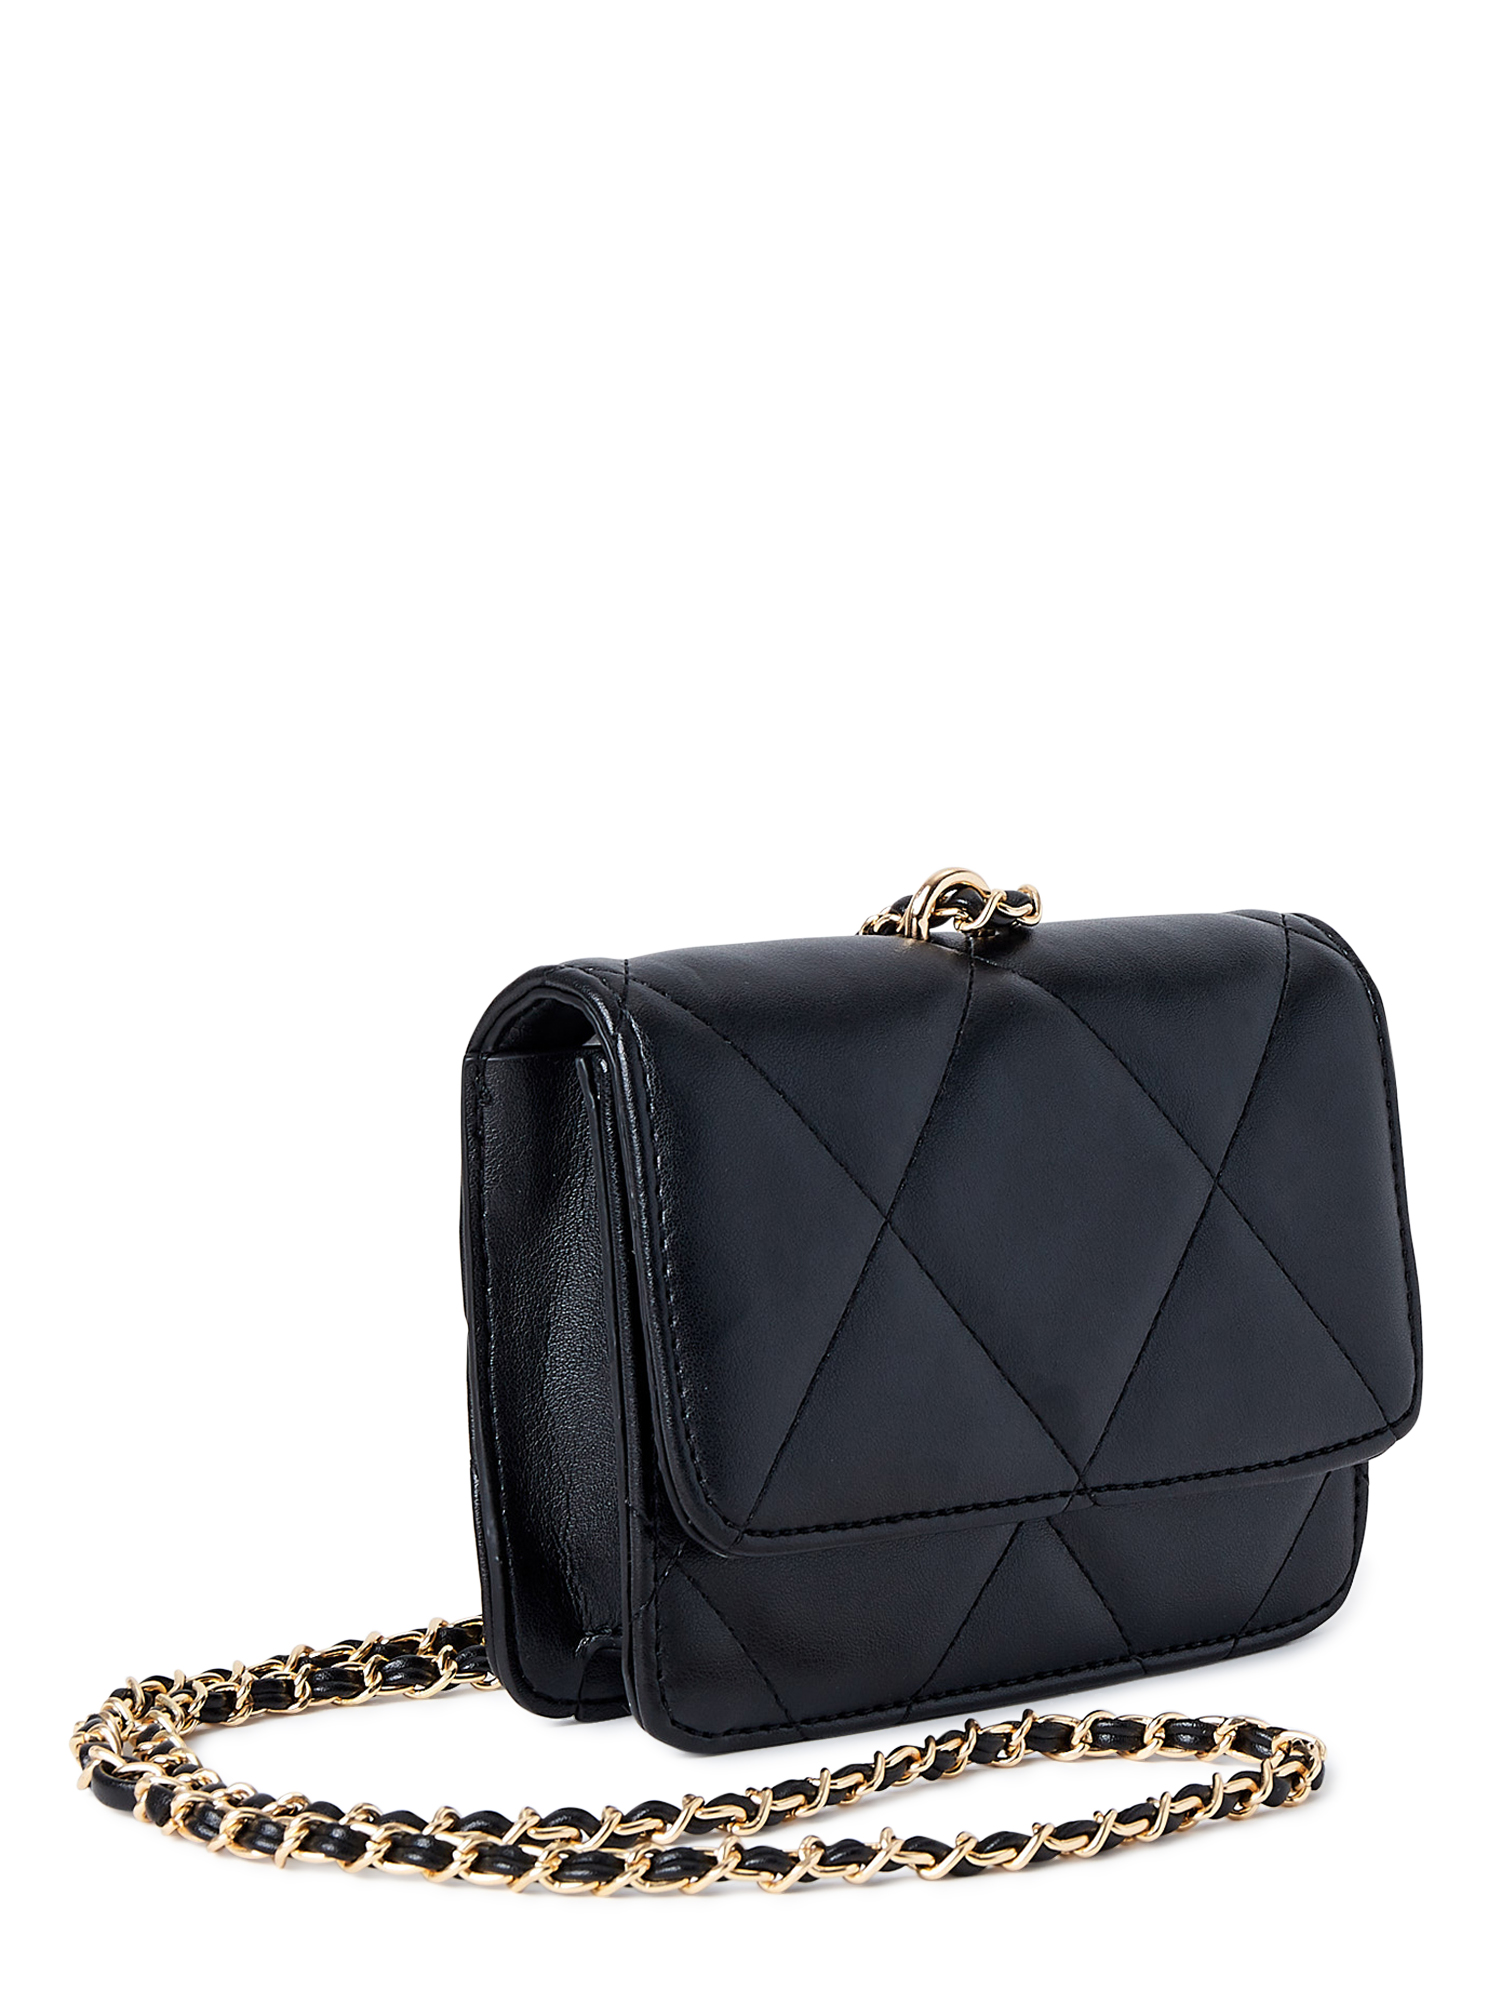 Jane & Berry Women's Small Quilted Faux Leather Crossbody with Faux Leather  Chain Strap, Black